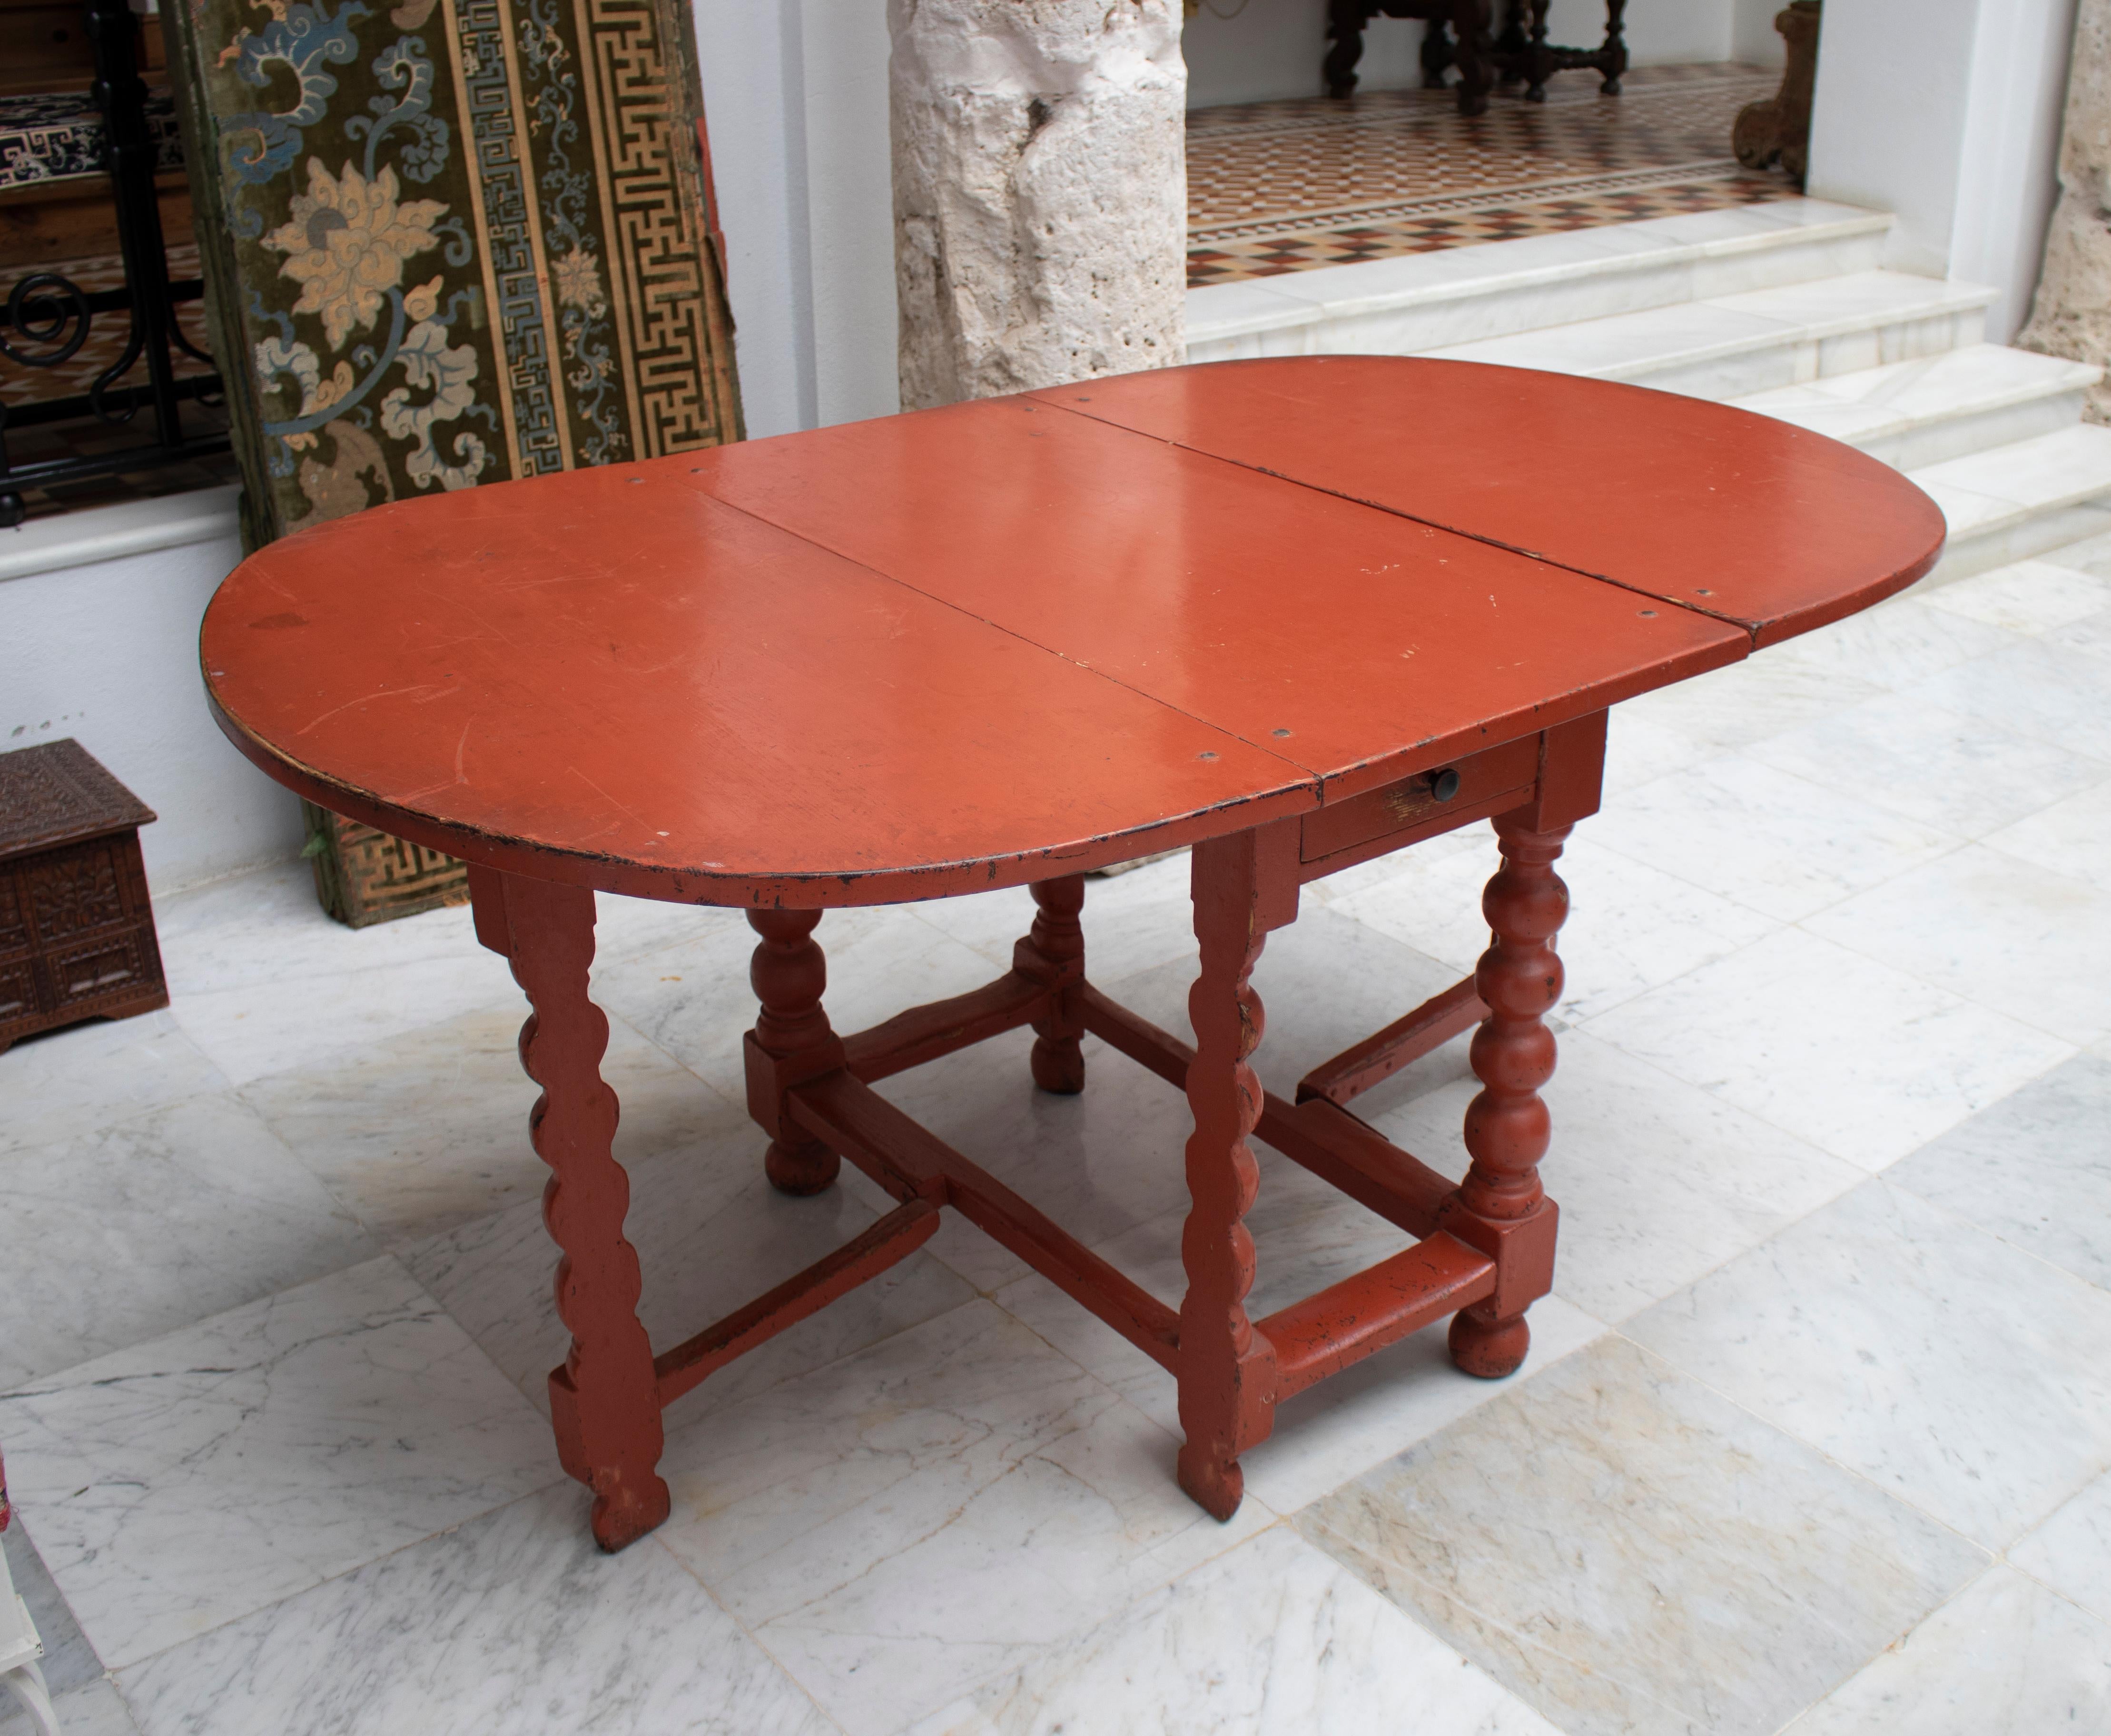 18th Century Spanish Wooden Folding Table Painted in Red 4